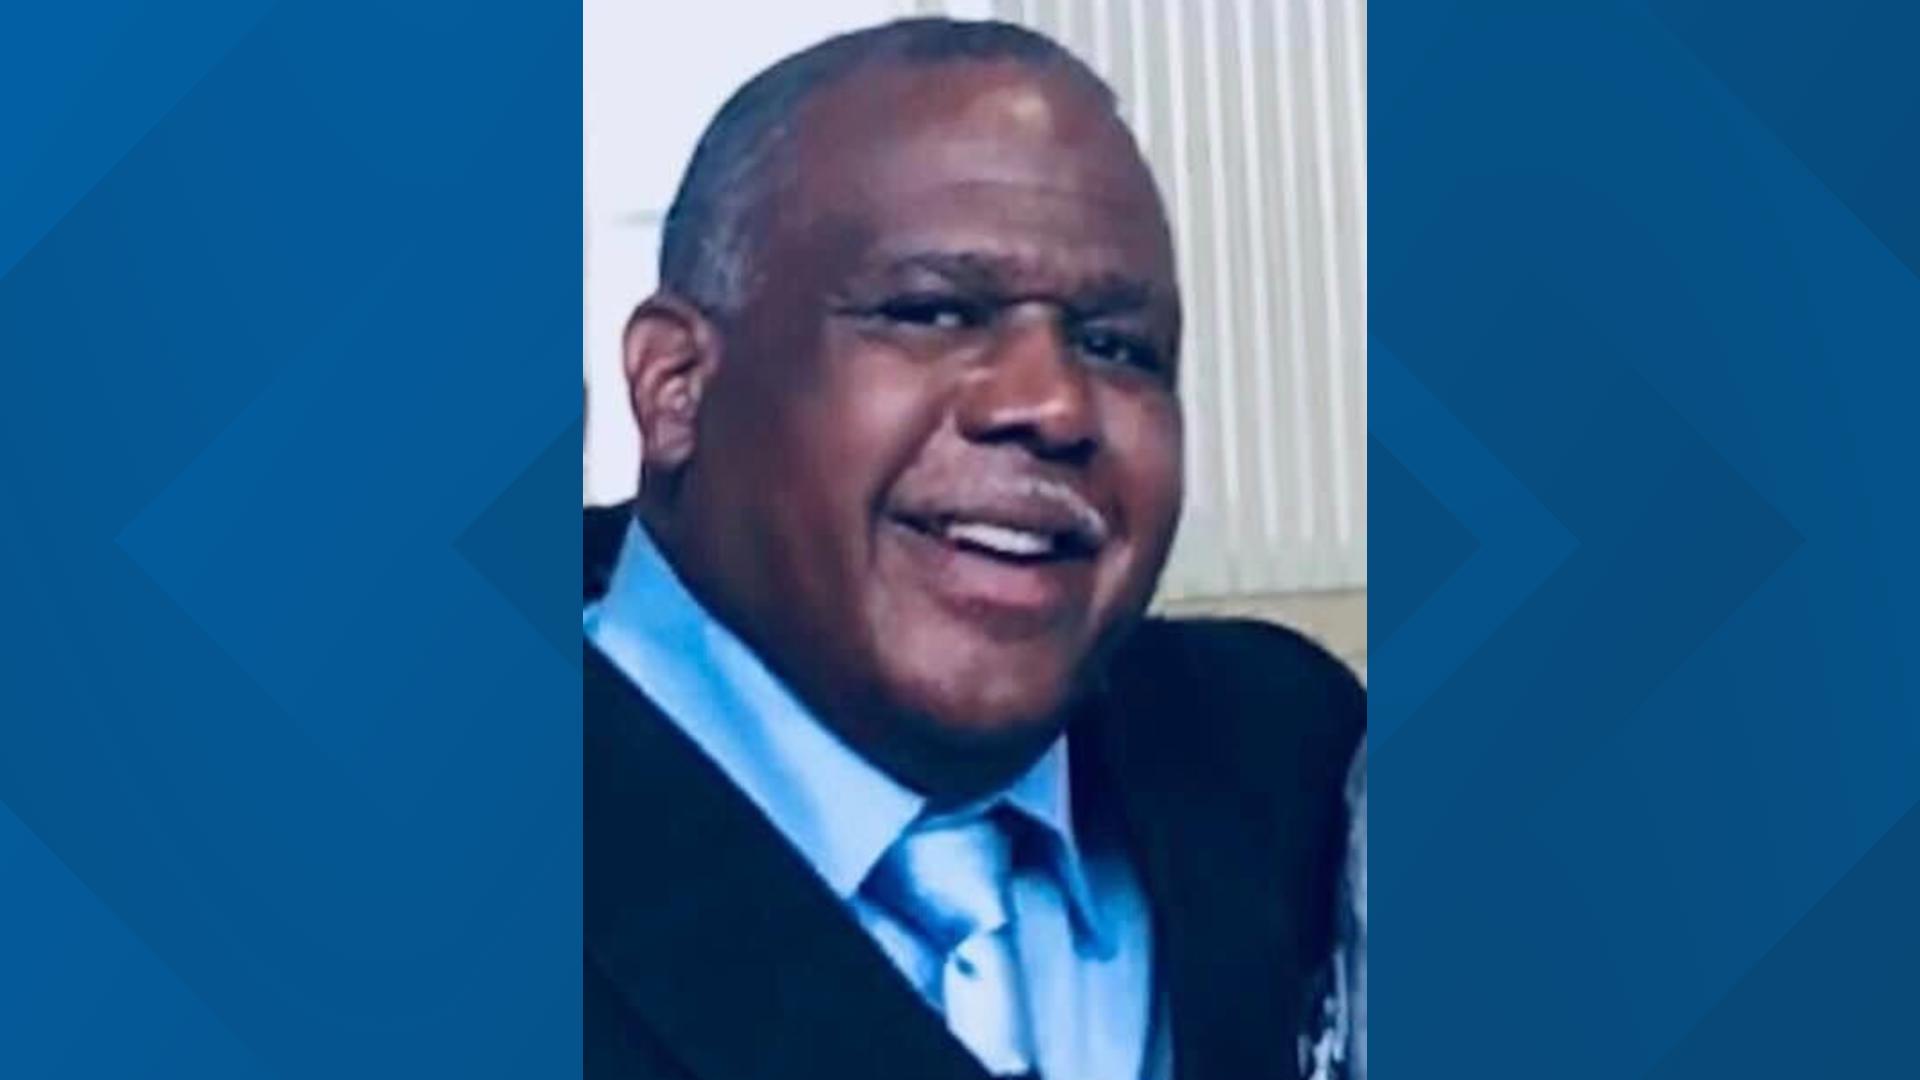 Dudley Champ was 58 years old and had been a corrections officer with Jefferson County since May 2019